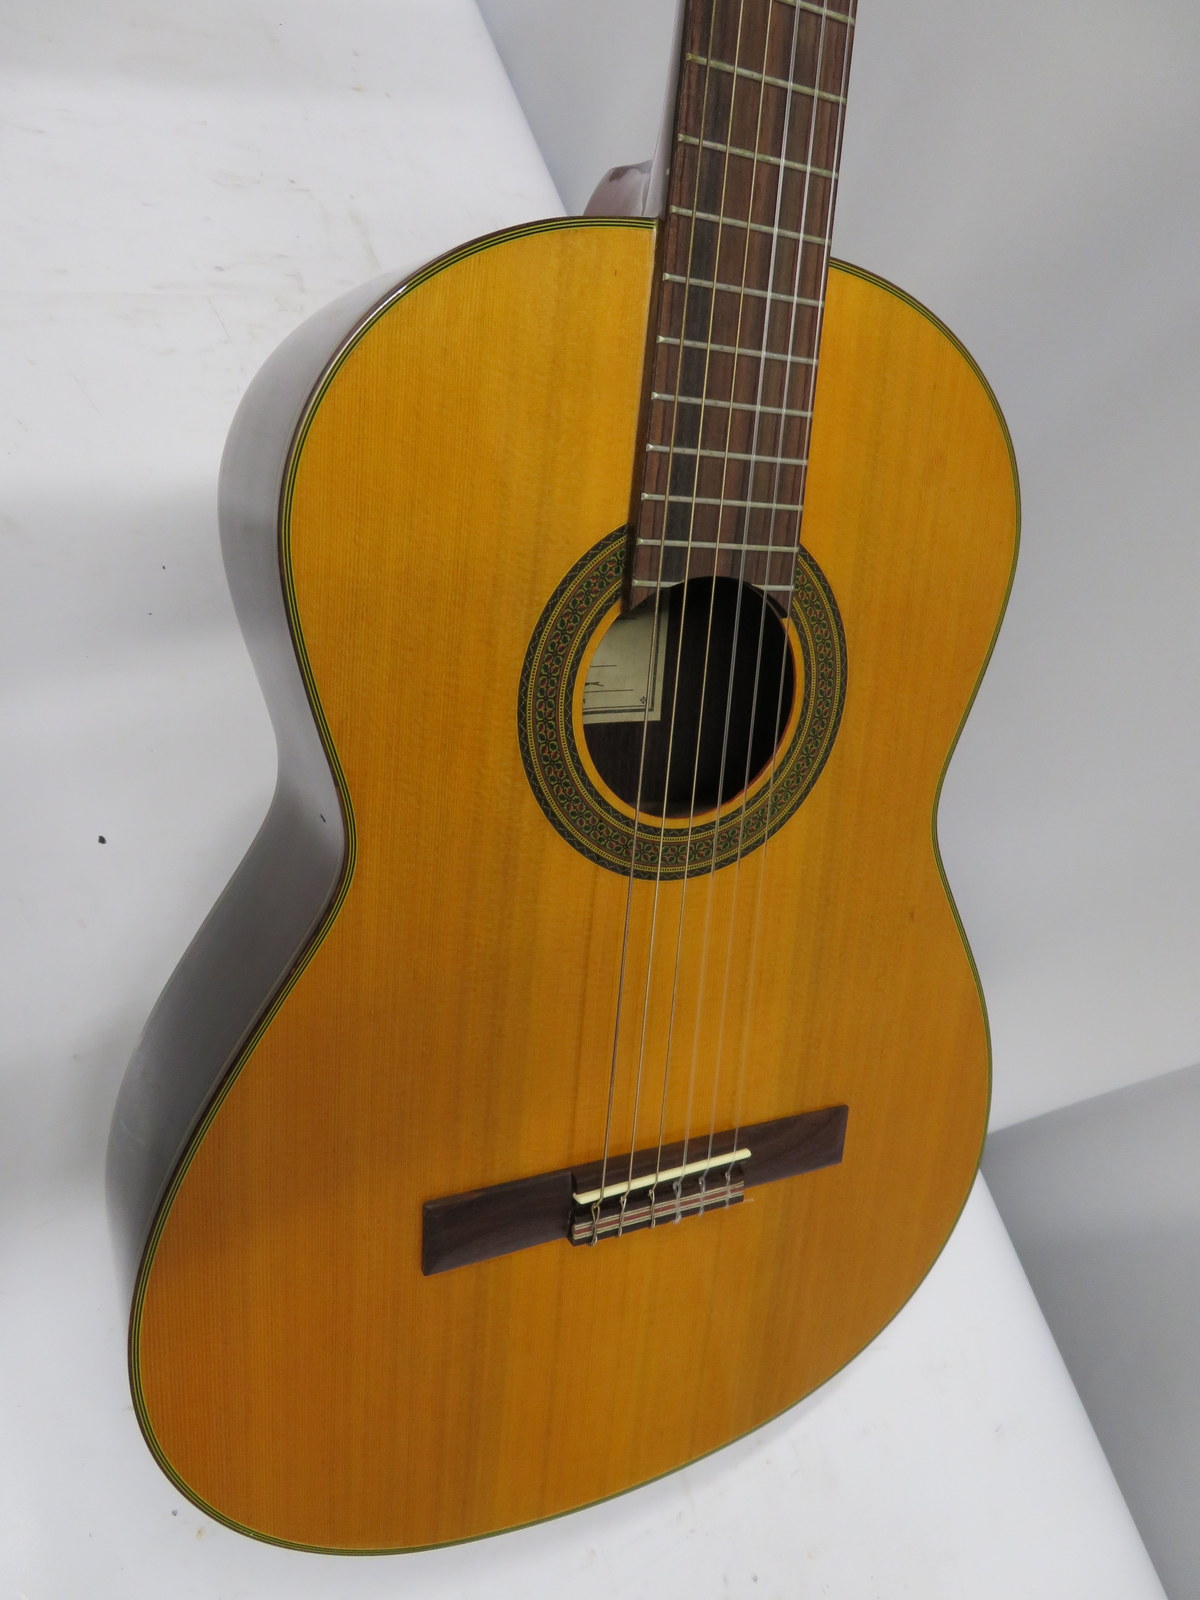 Washburn Enrique Tapicas C8S acoustic guitar with case. Serial number: 96010012. - Image 5 of 13